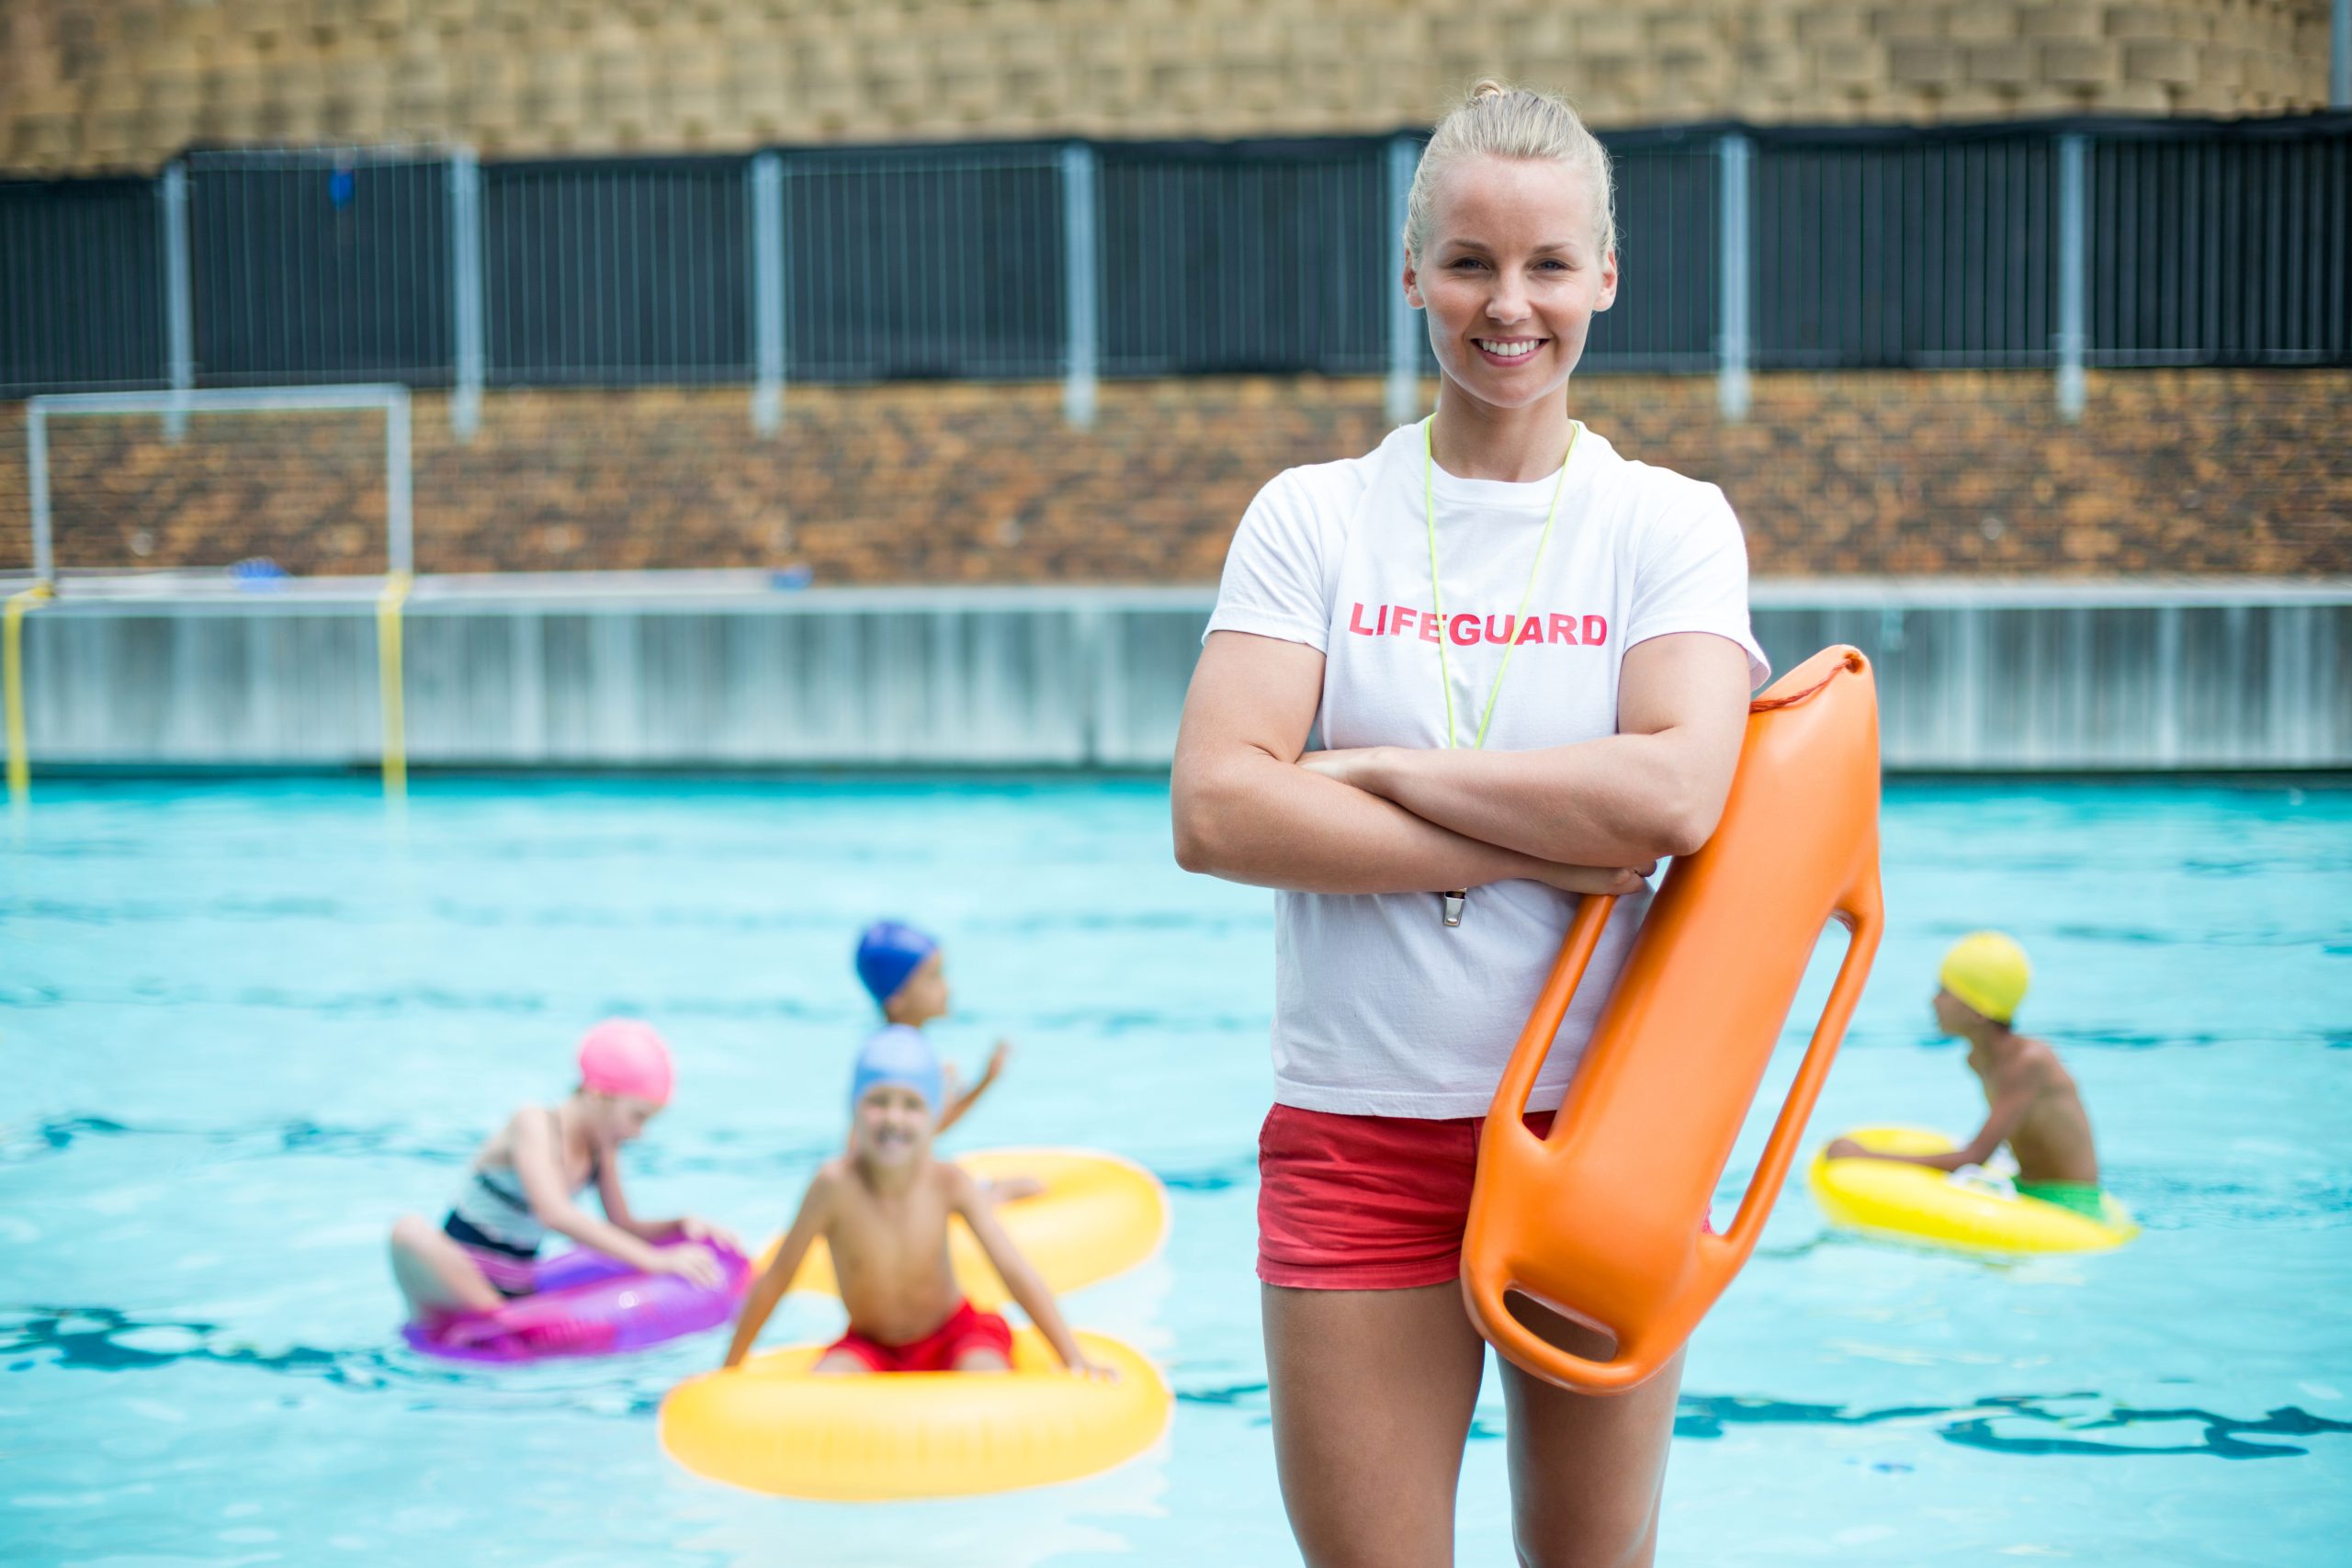 Lifeguard-pro-image-get-certified-Water-Safety-Swim-Instructor